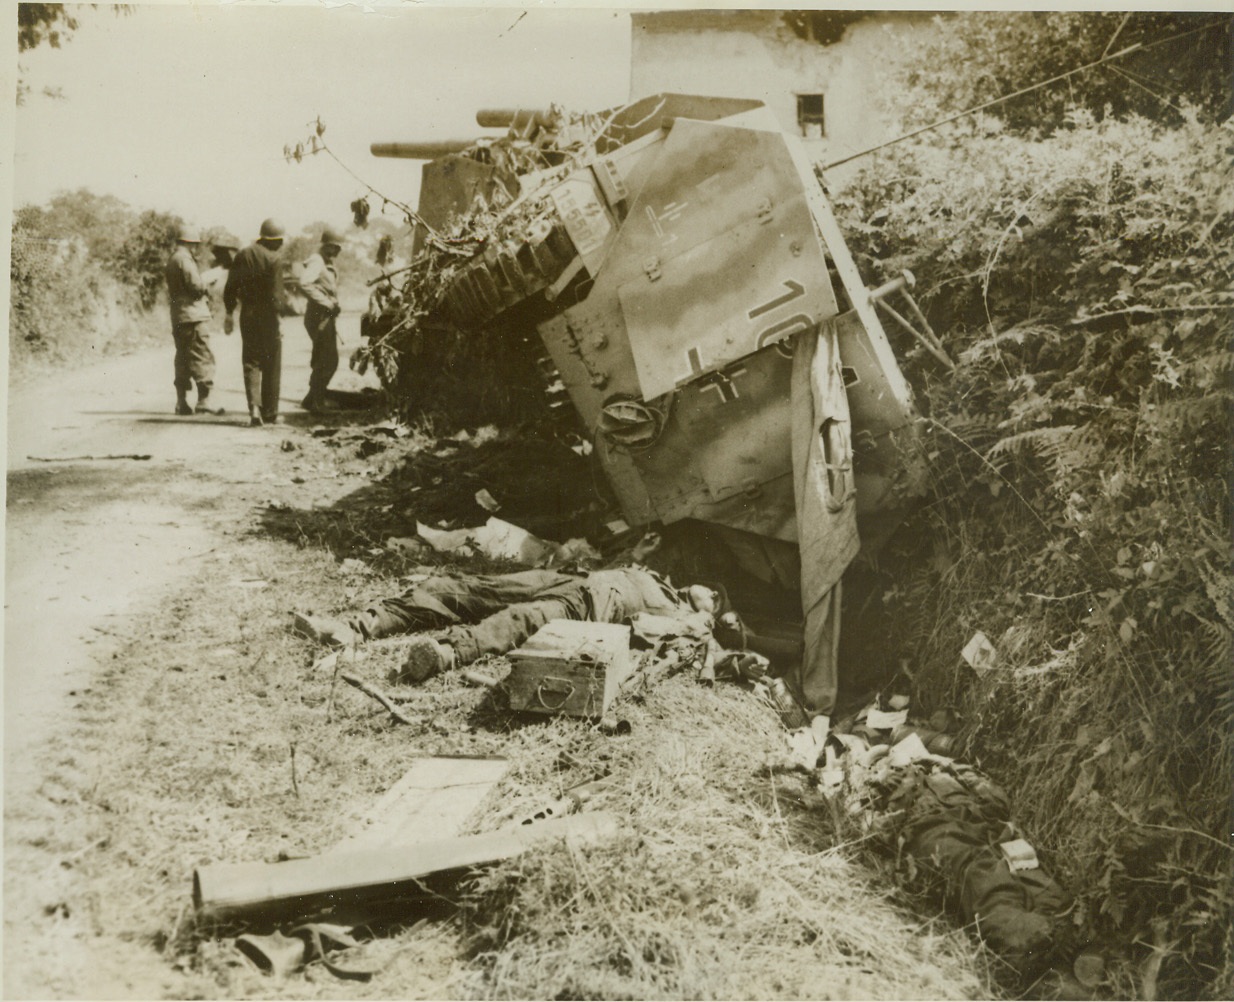 Where Nazi Panzers Were Trapped, 8/3/1944. France—Wrecked German armored vehicles and their dead crew members lie along this road in Roncey, where they were trapped by American troops and destroyed by supporting Allied fighters and rocket bombers. The U.S. Second Armored Division sprung the trap on the Nazis. Credit: ACME;